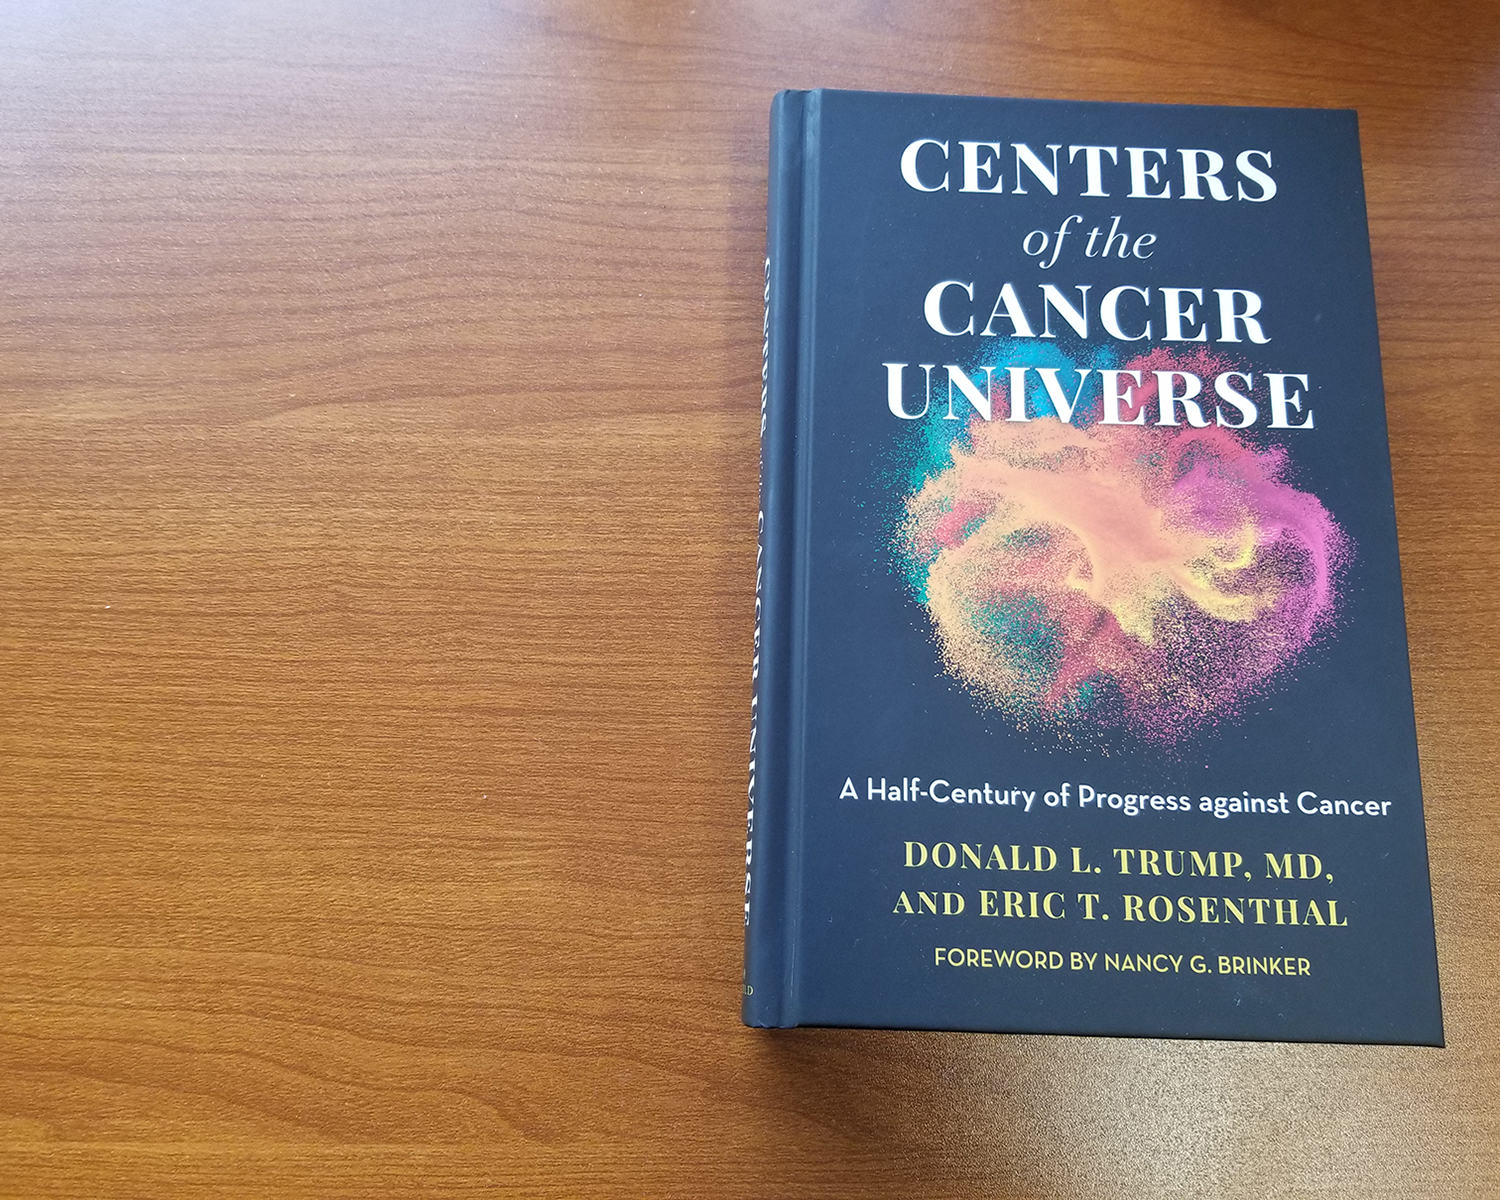 The Significance of NCI-Designated Cancer Centers